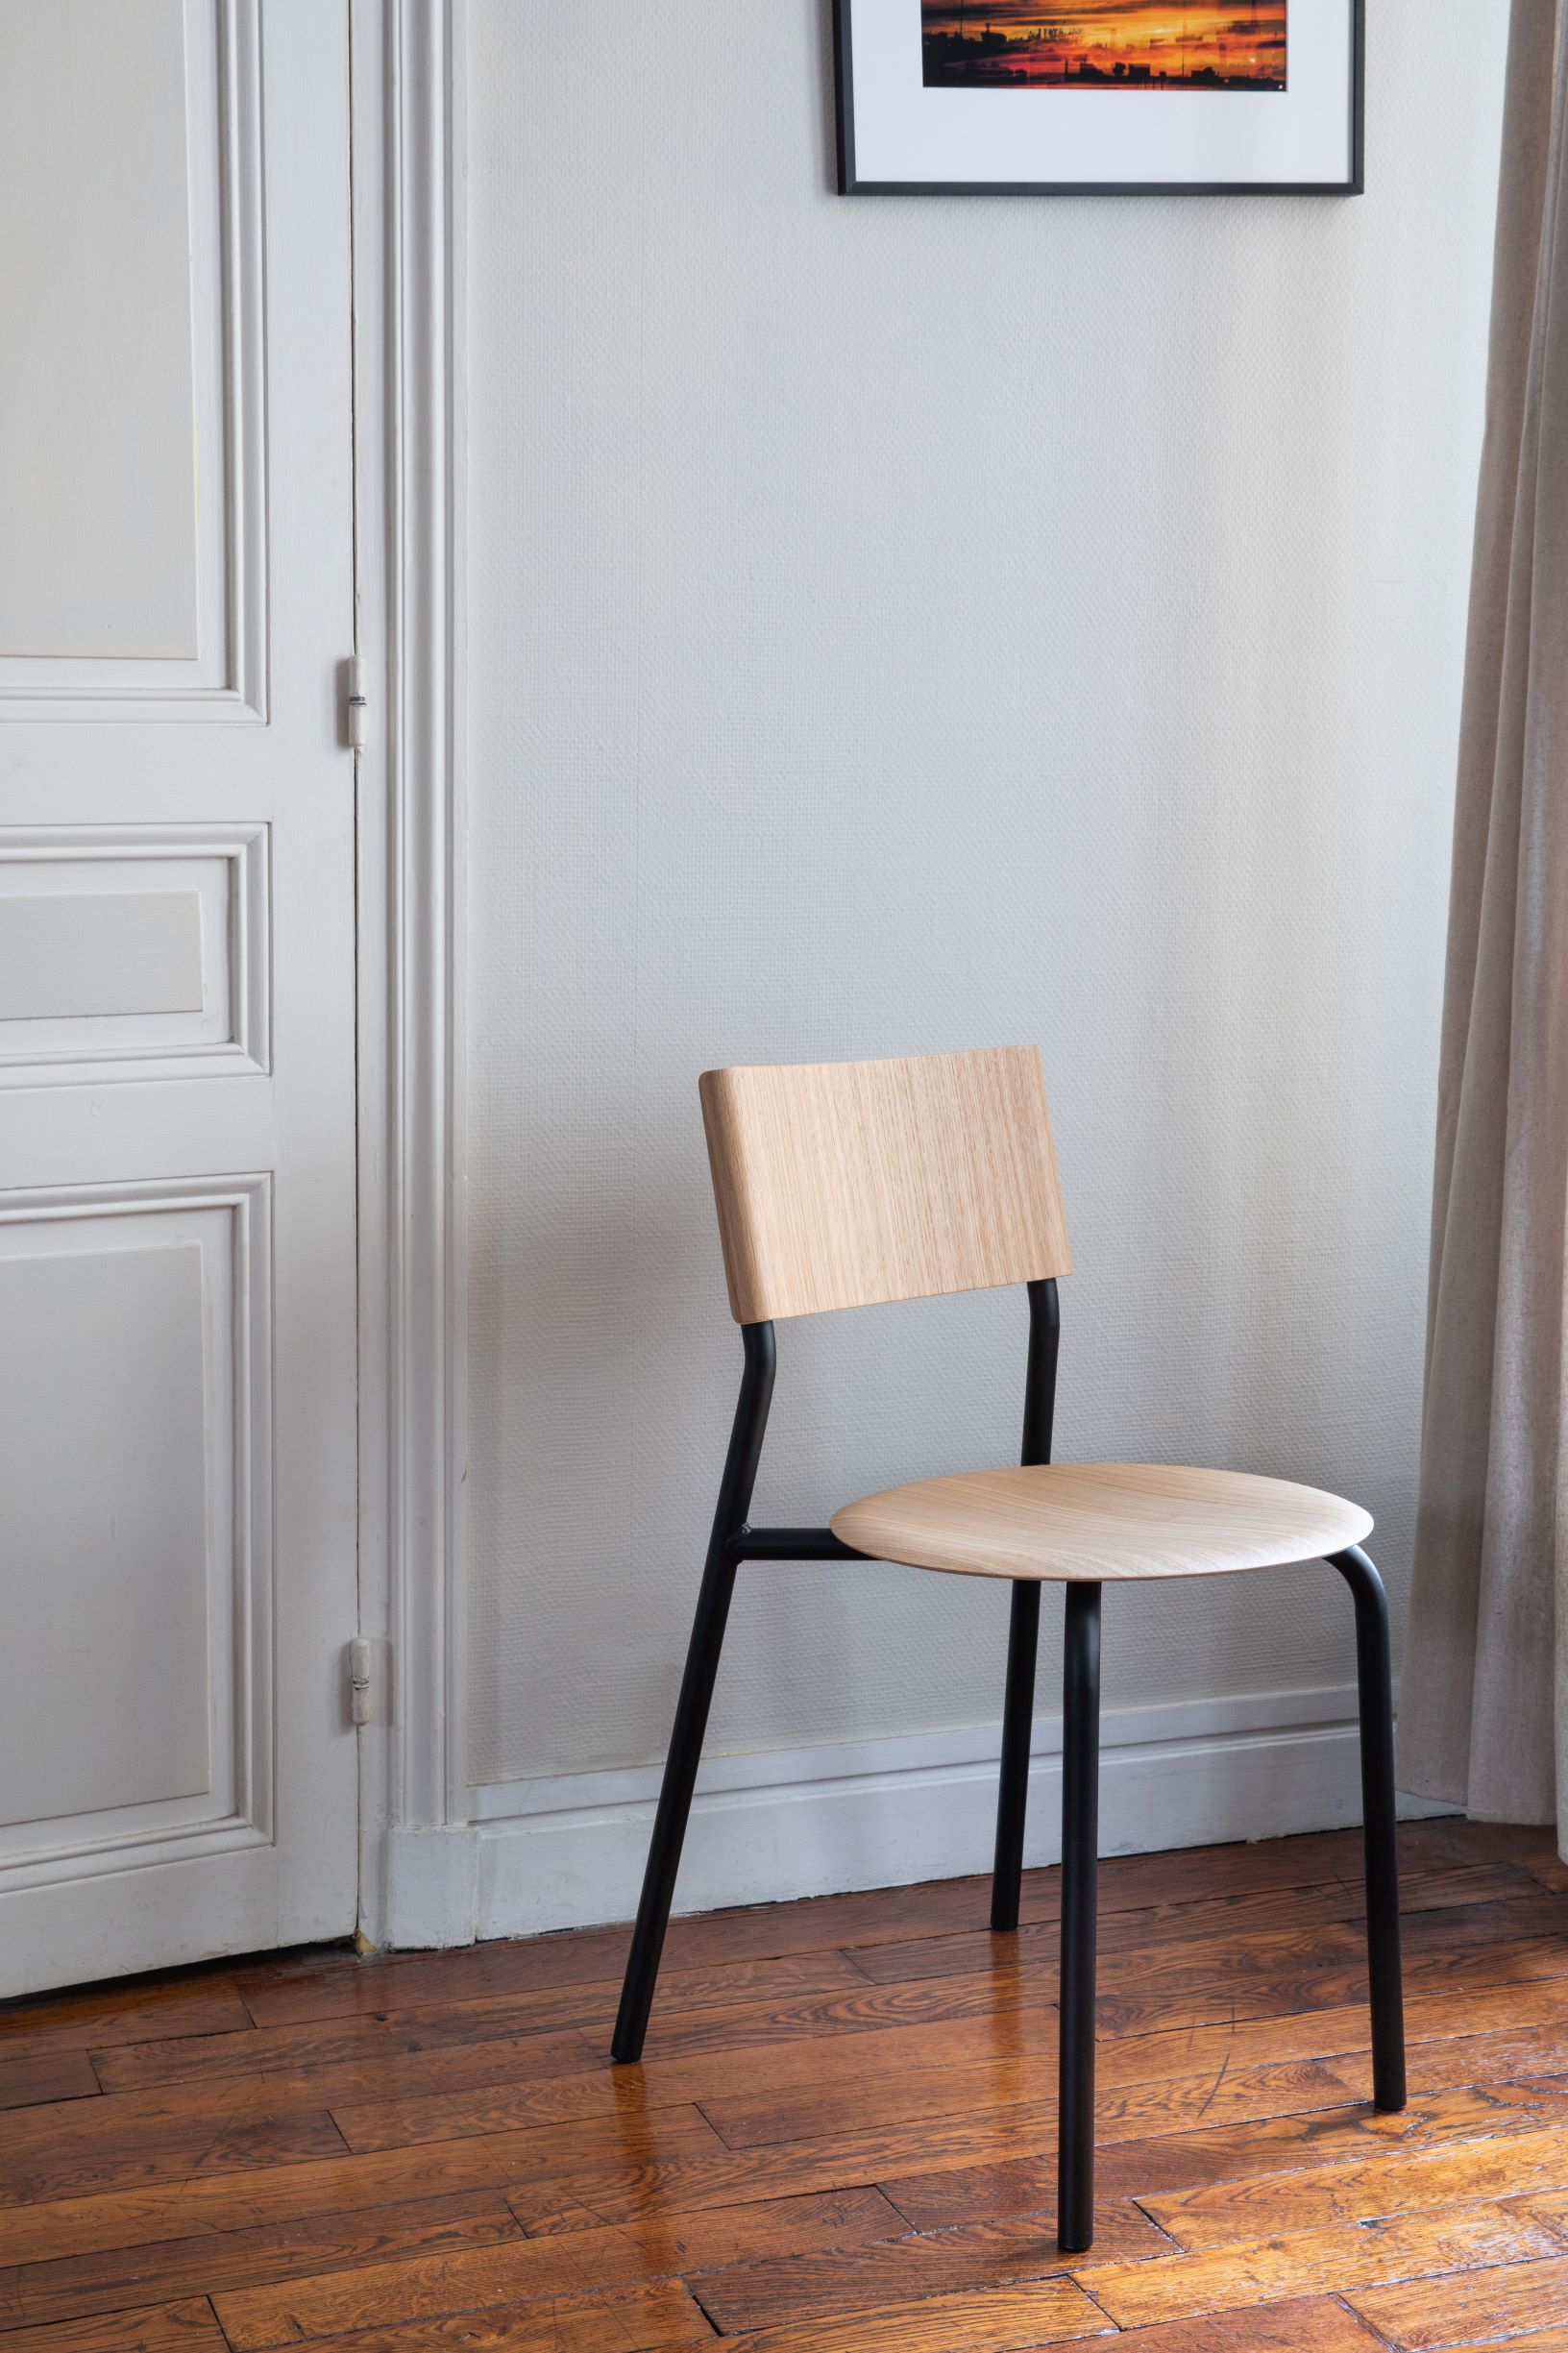 SSD Chair : Simple, Strong and Durable - durable furniture